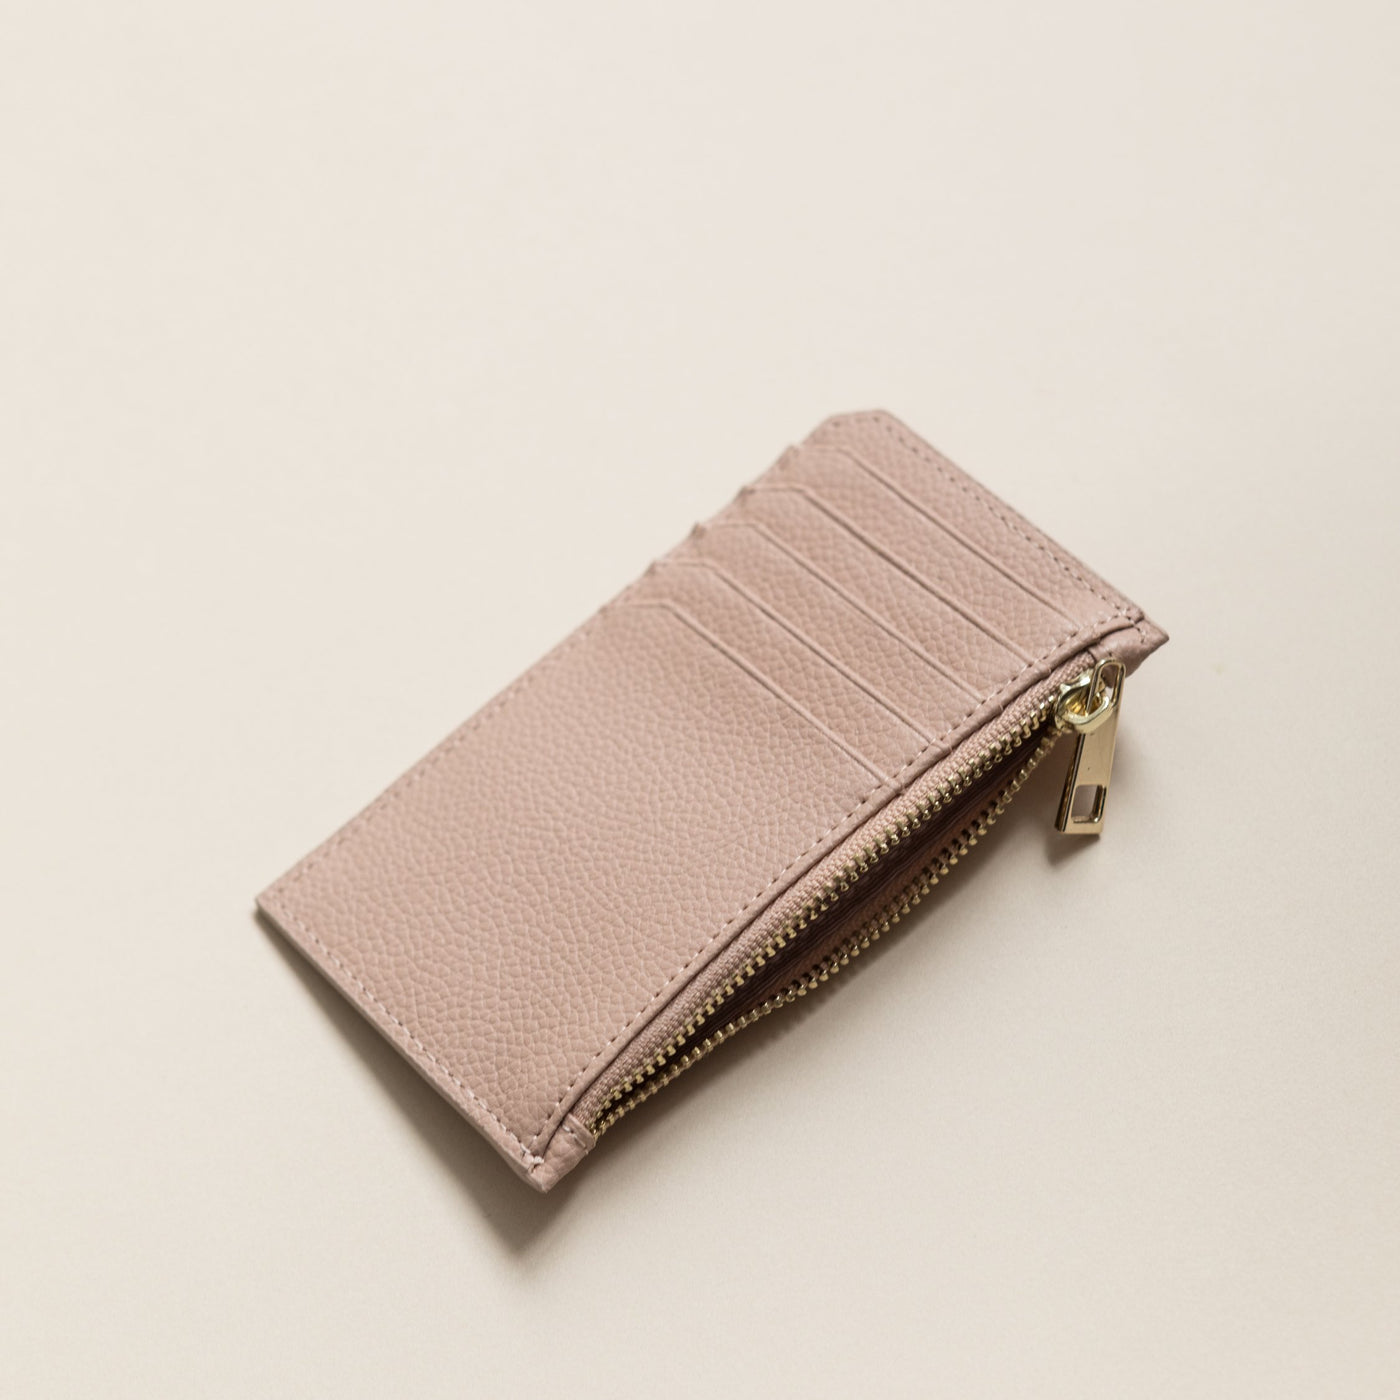 Lark and Ives / Vegan Leather Accessories / Small Accessories / Wallet / Mini Wallet / Card Case / Card Holder / Zippered Wallet / Zipper closure / Nude Pink